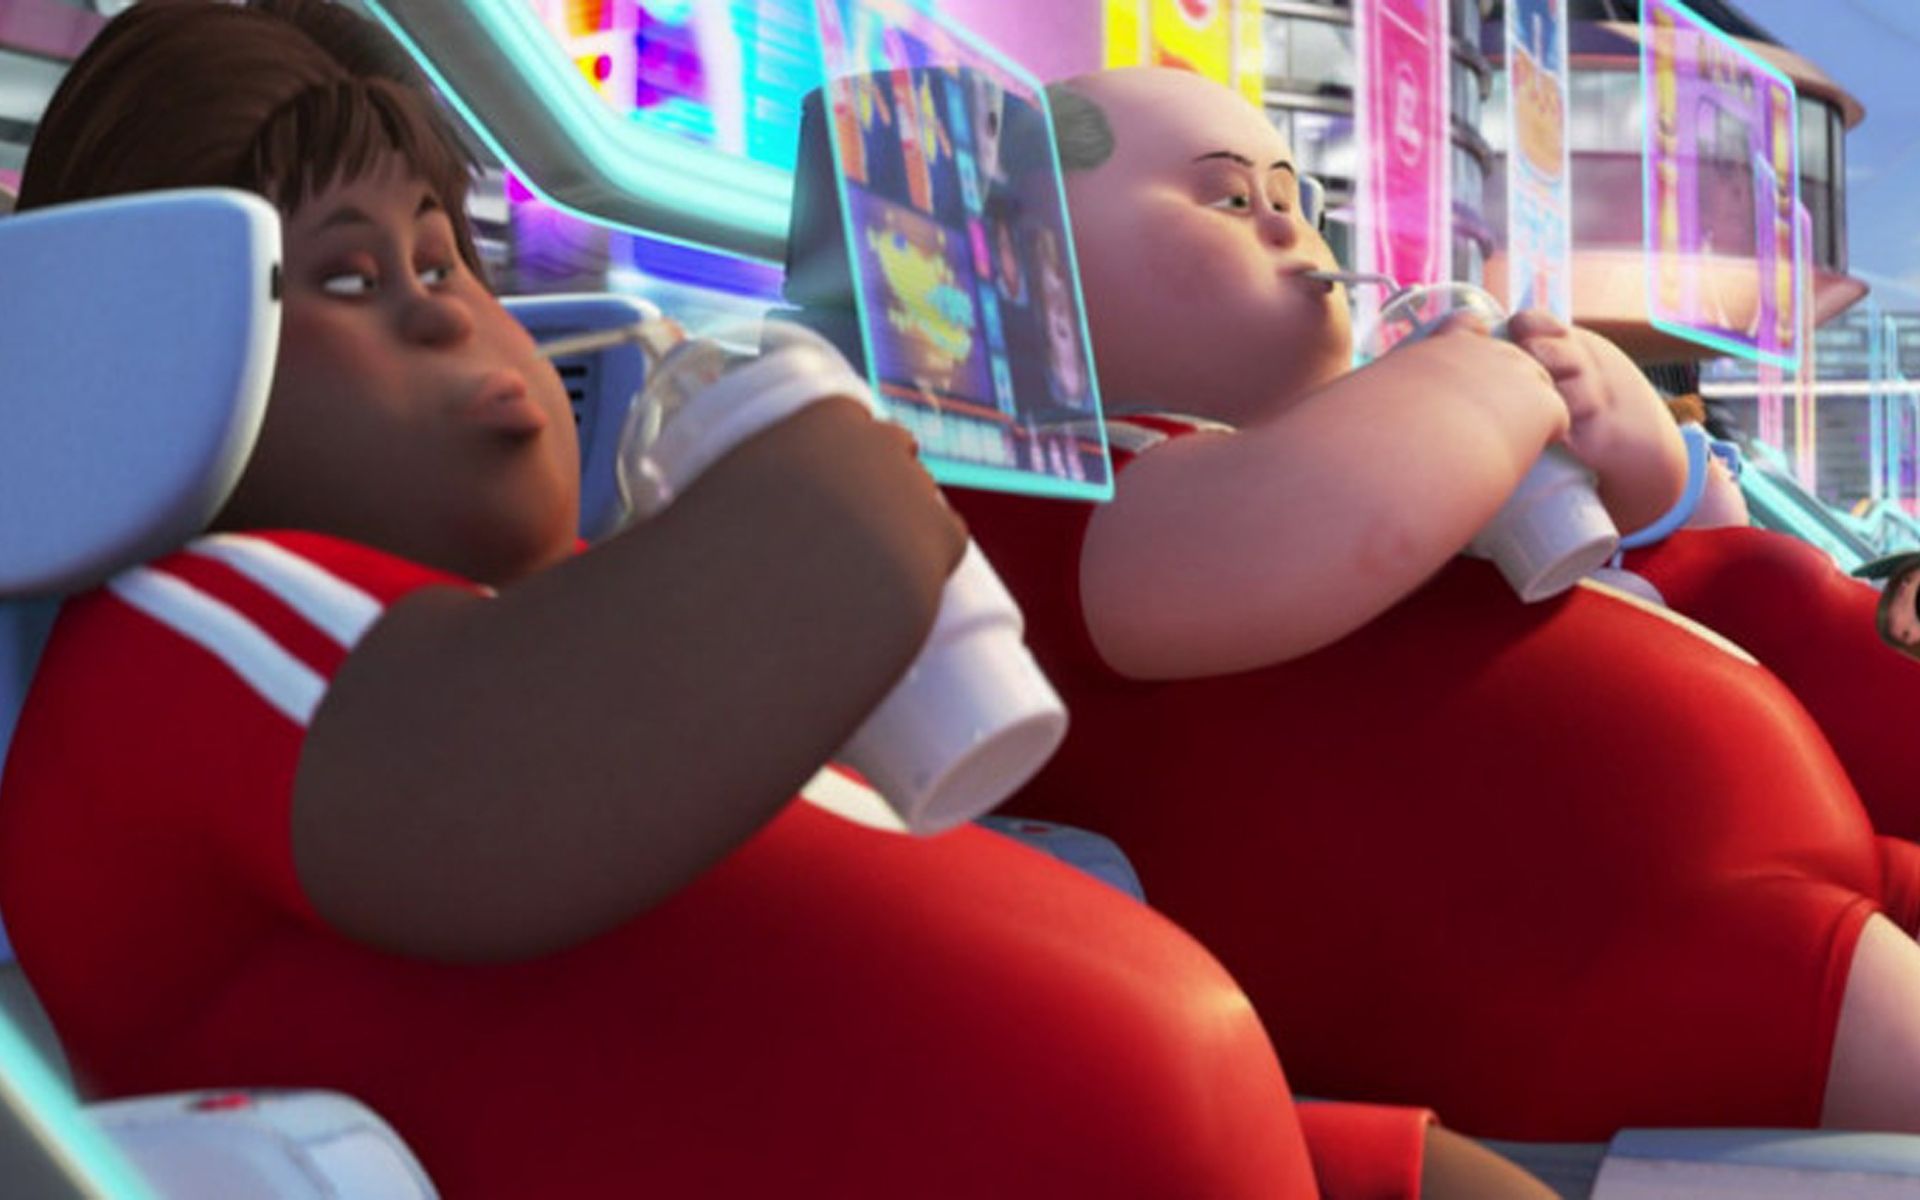 Disney To Pull WALL-E From All Services Over Fatphobic Imagery